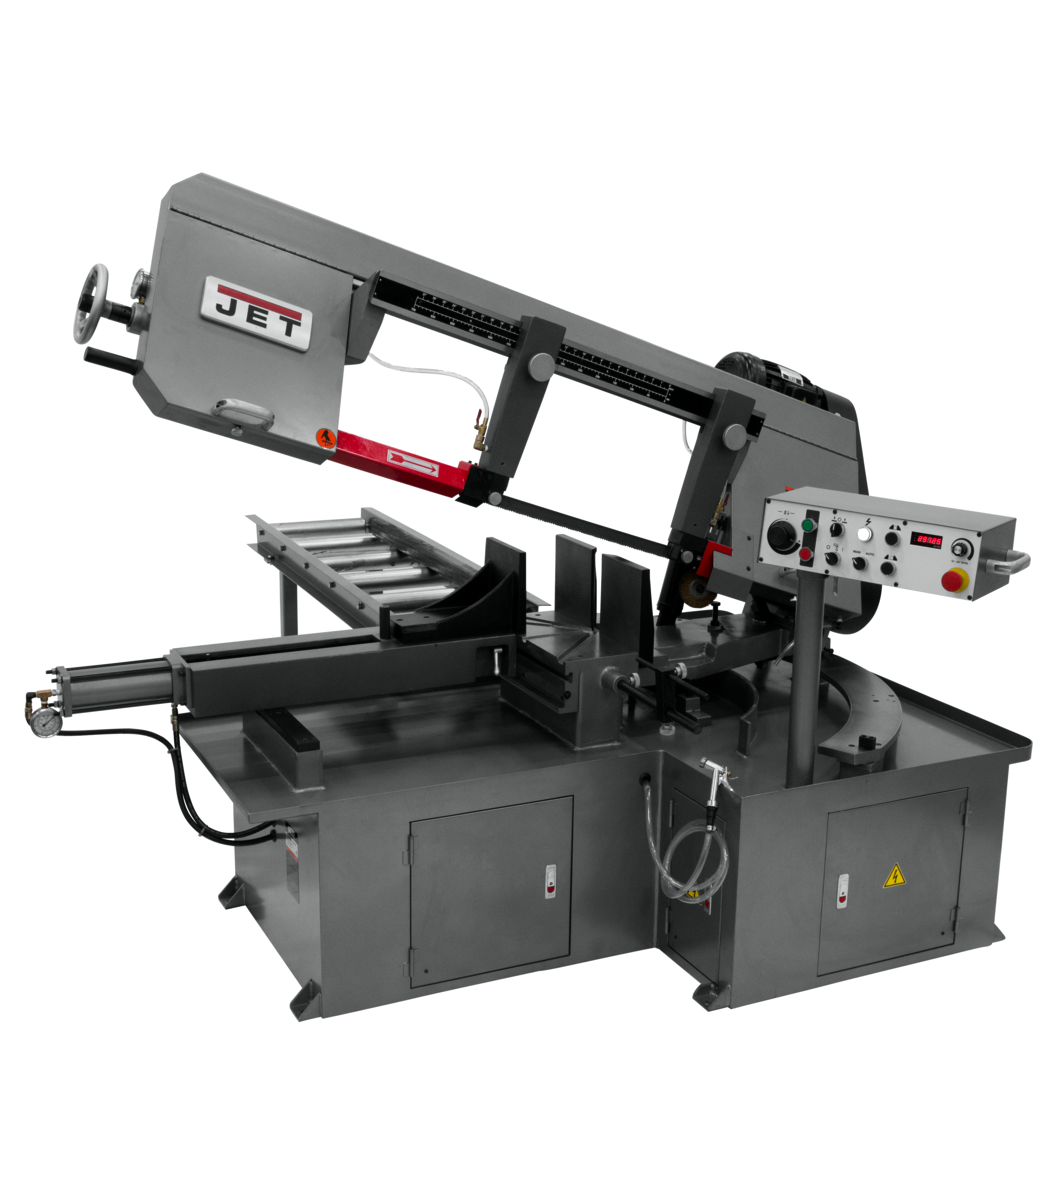 JET Semi-Automatic Dual Mitering Band Saw 3HP 230V, 3-Ph | MBS-1323EVS-H